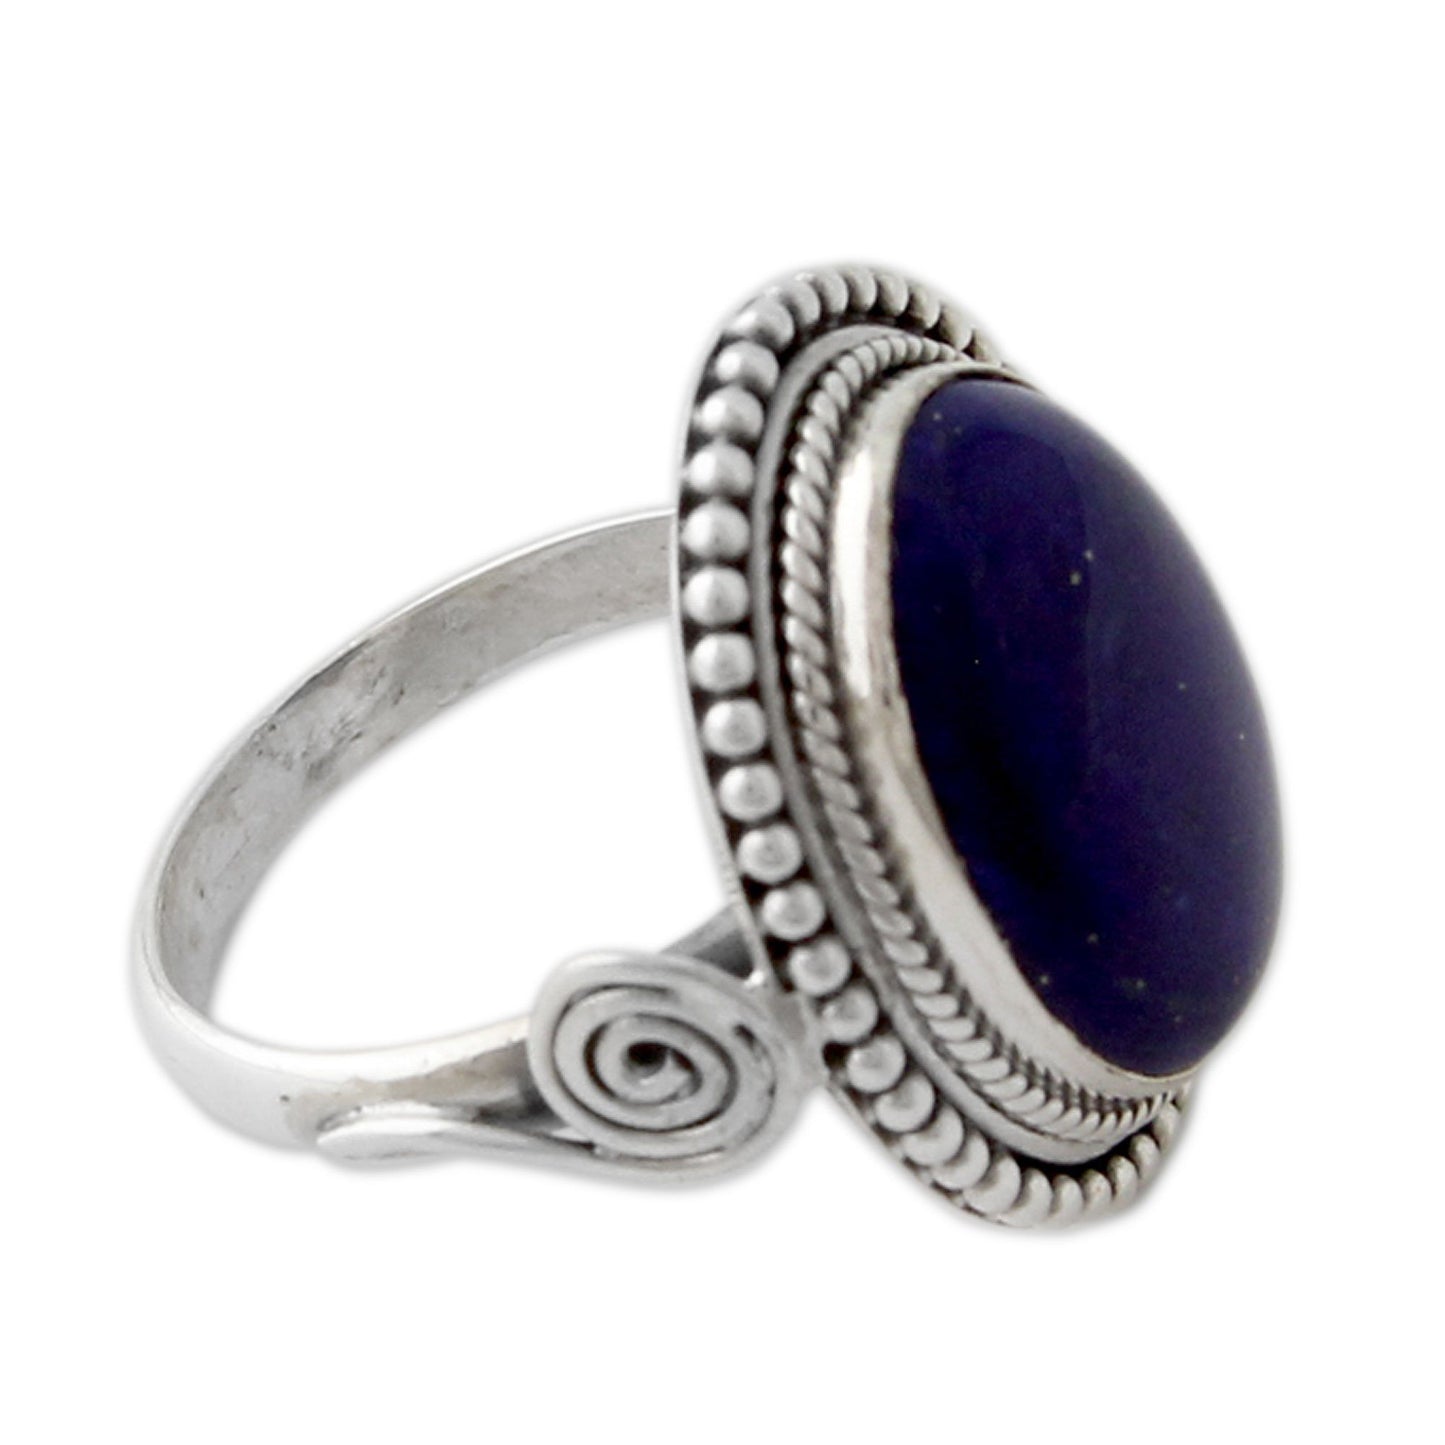 NOVICA - Lapis Lazuli & Sterling Silver Handcrafted Cocktail Ring